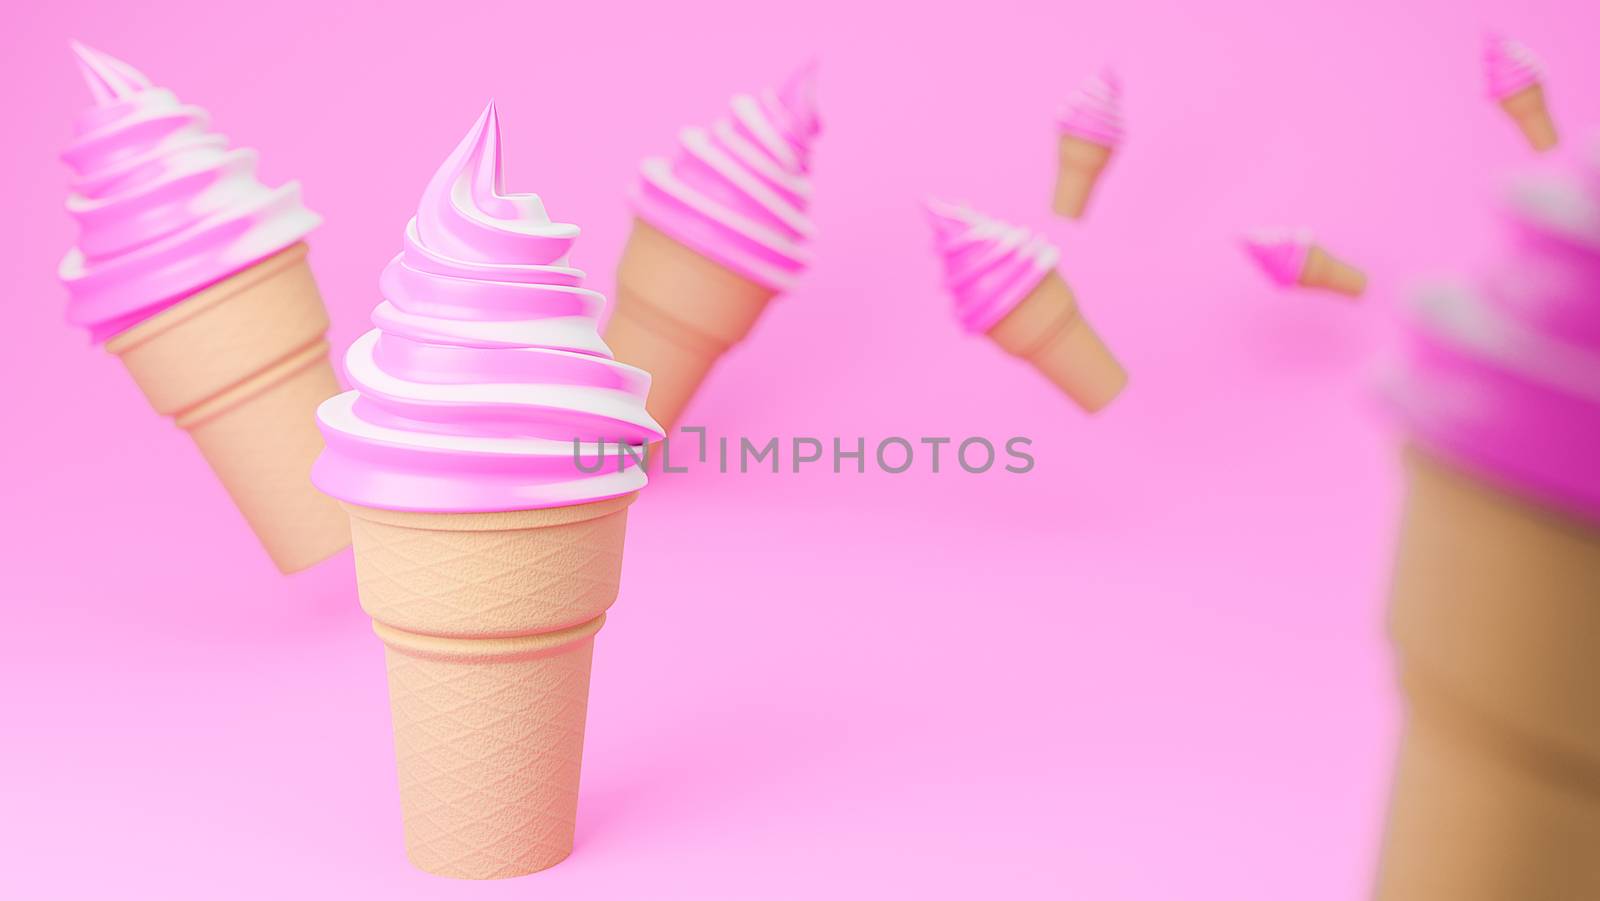 Soft serve ice cream of strawberry and milk flavours on crispy cone on pink background.,3d model and illustration.